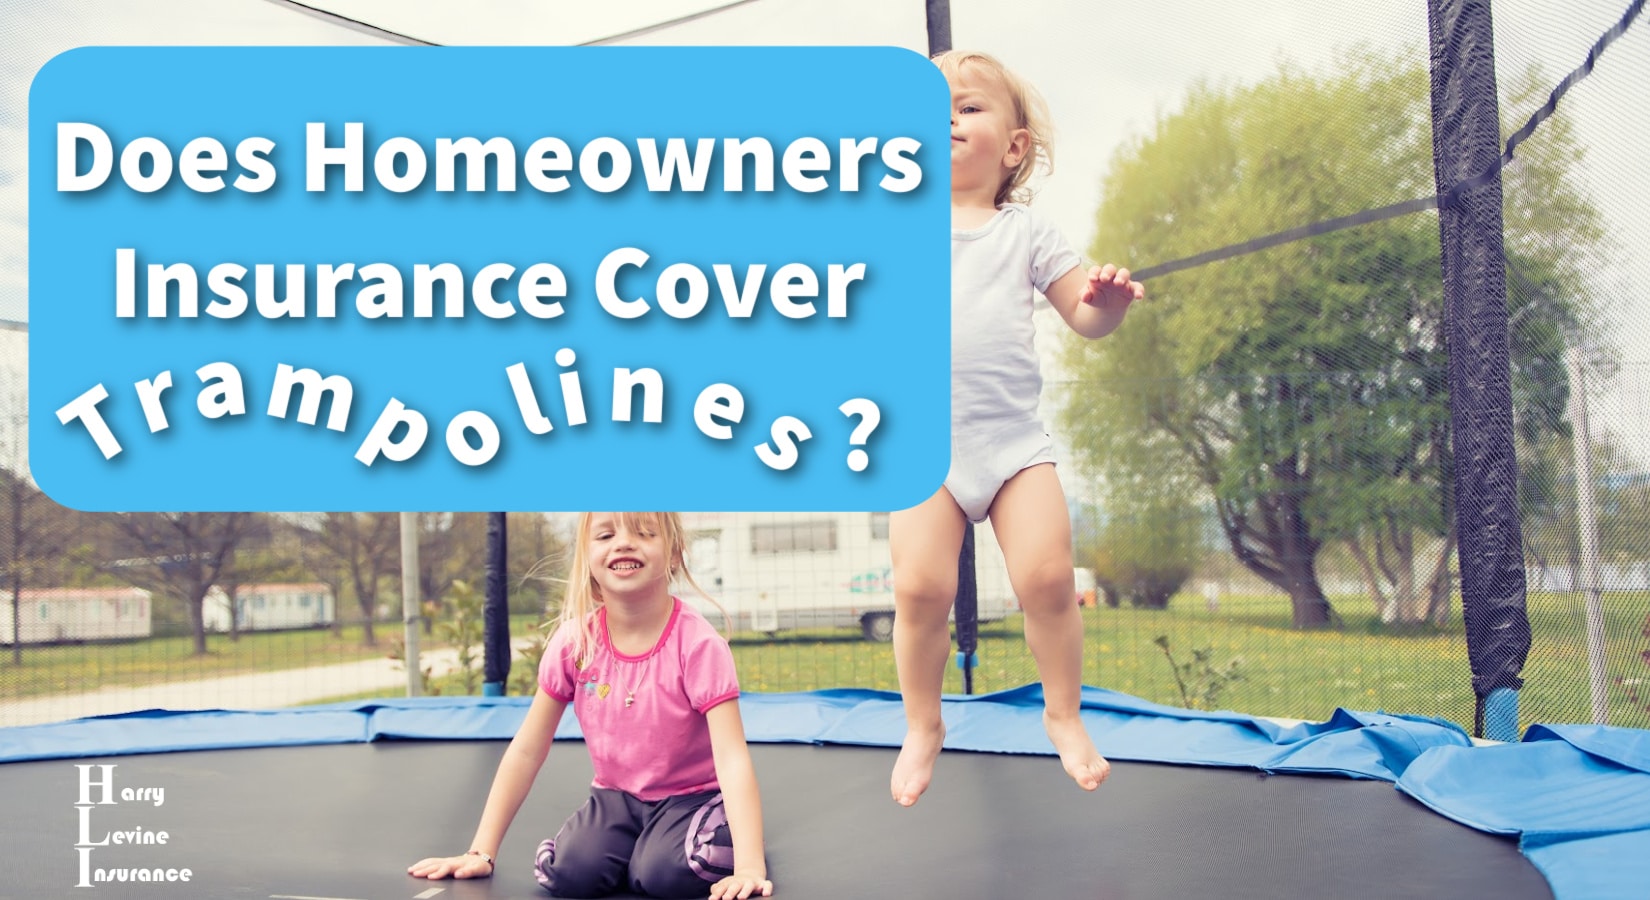 Does Homeowners Insurance Cover Trampolines? – Harry Levine Insurance